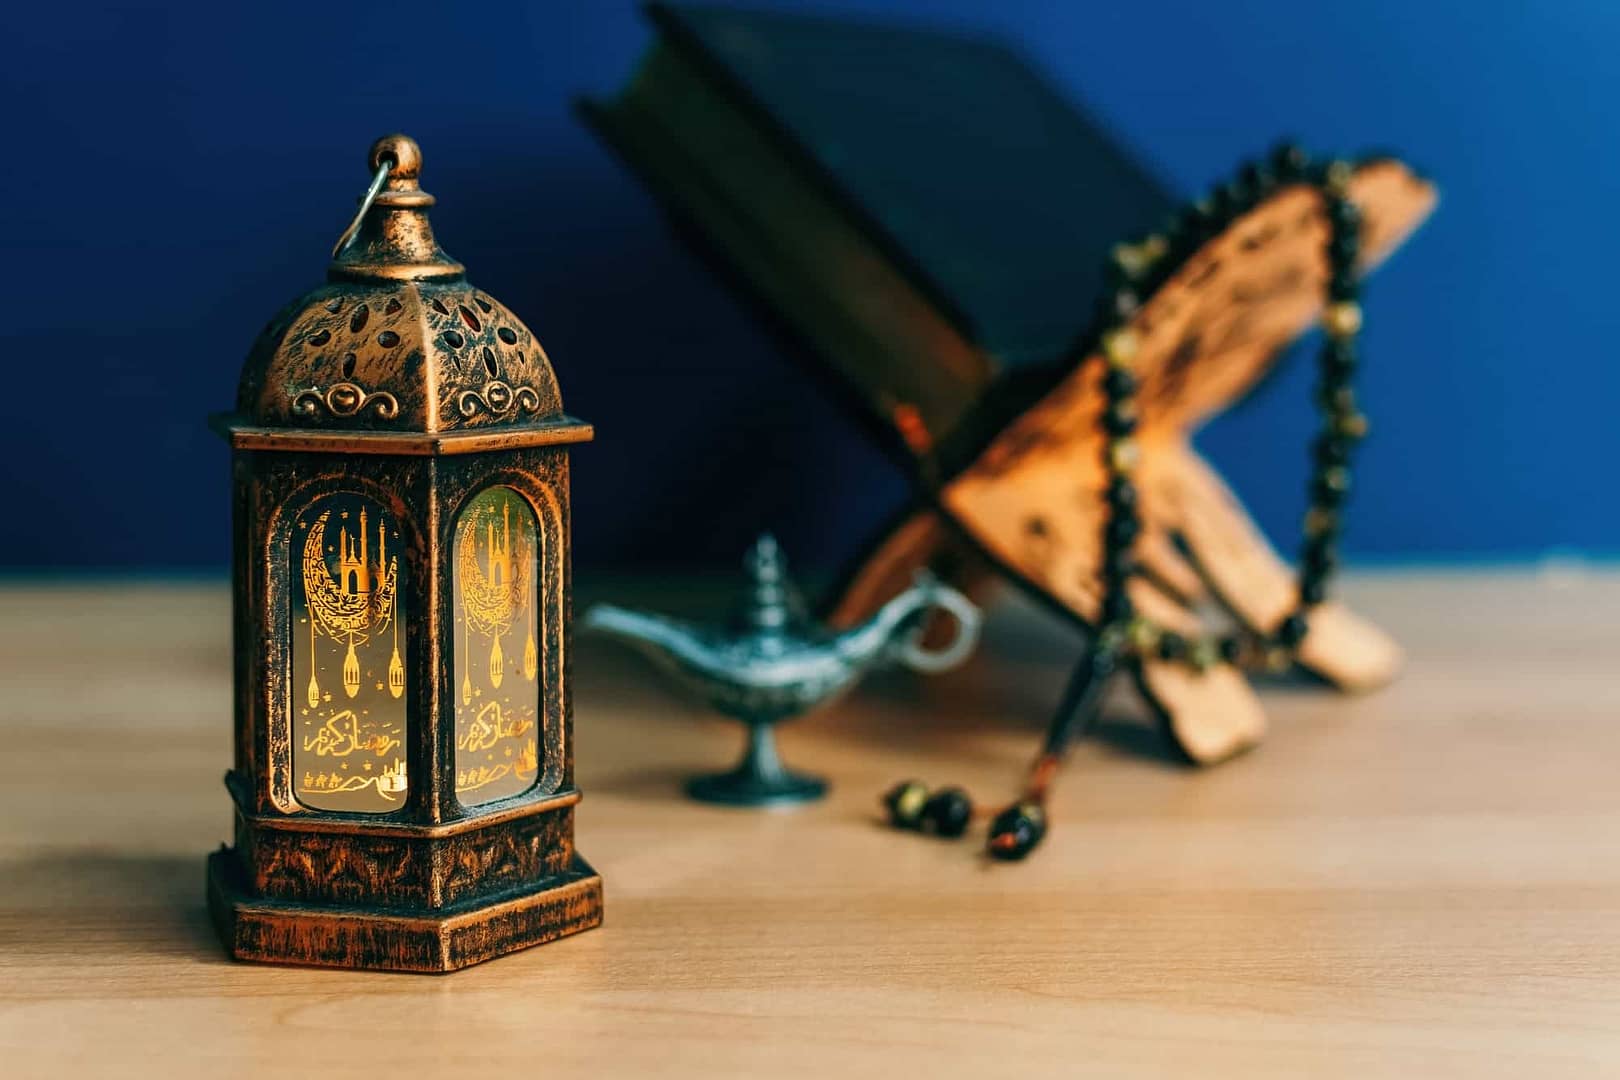 Lantern, religious book and lamp on wooden background concept of Islamic Ramadan holiday